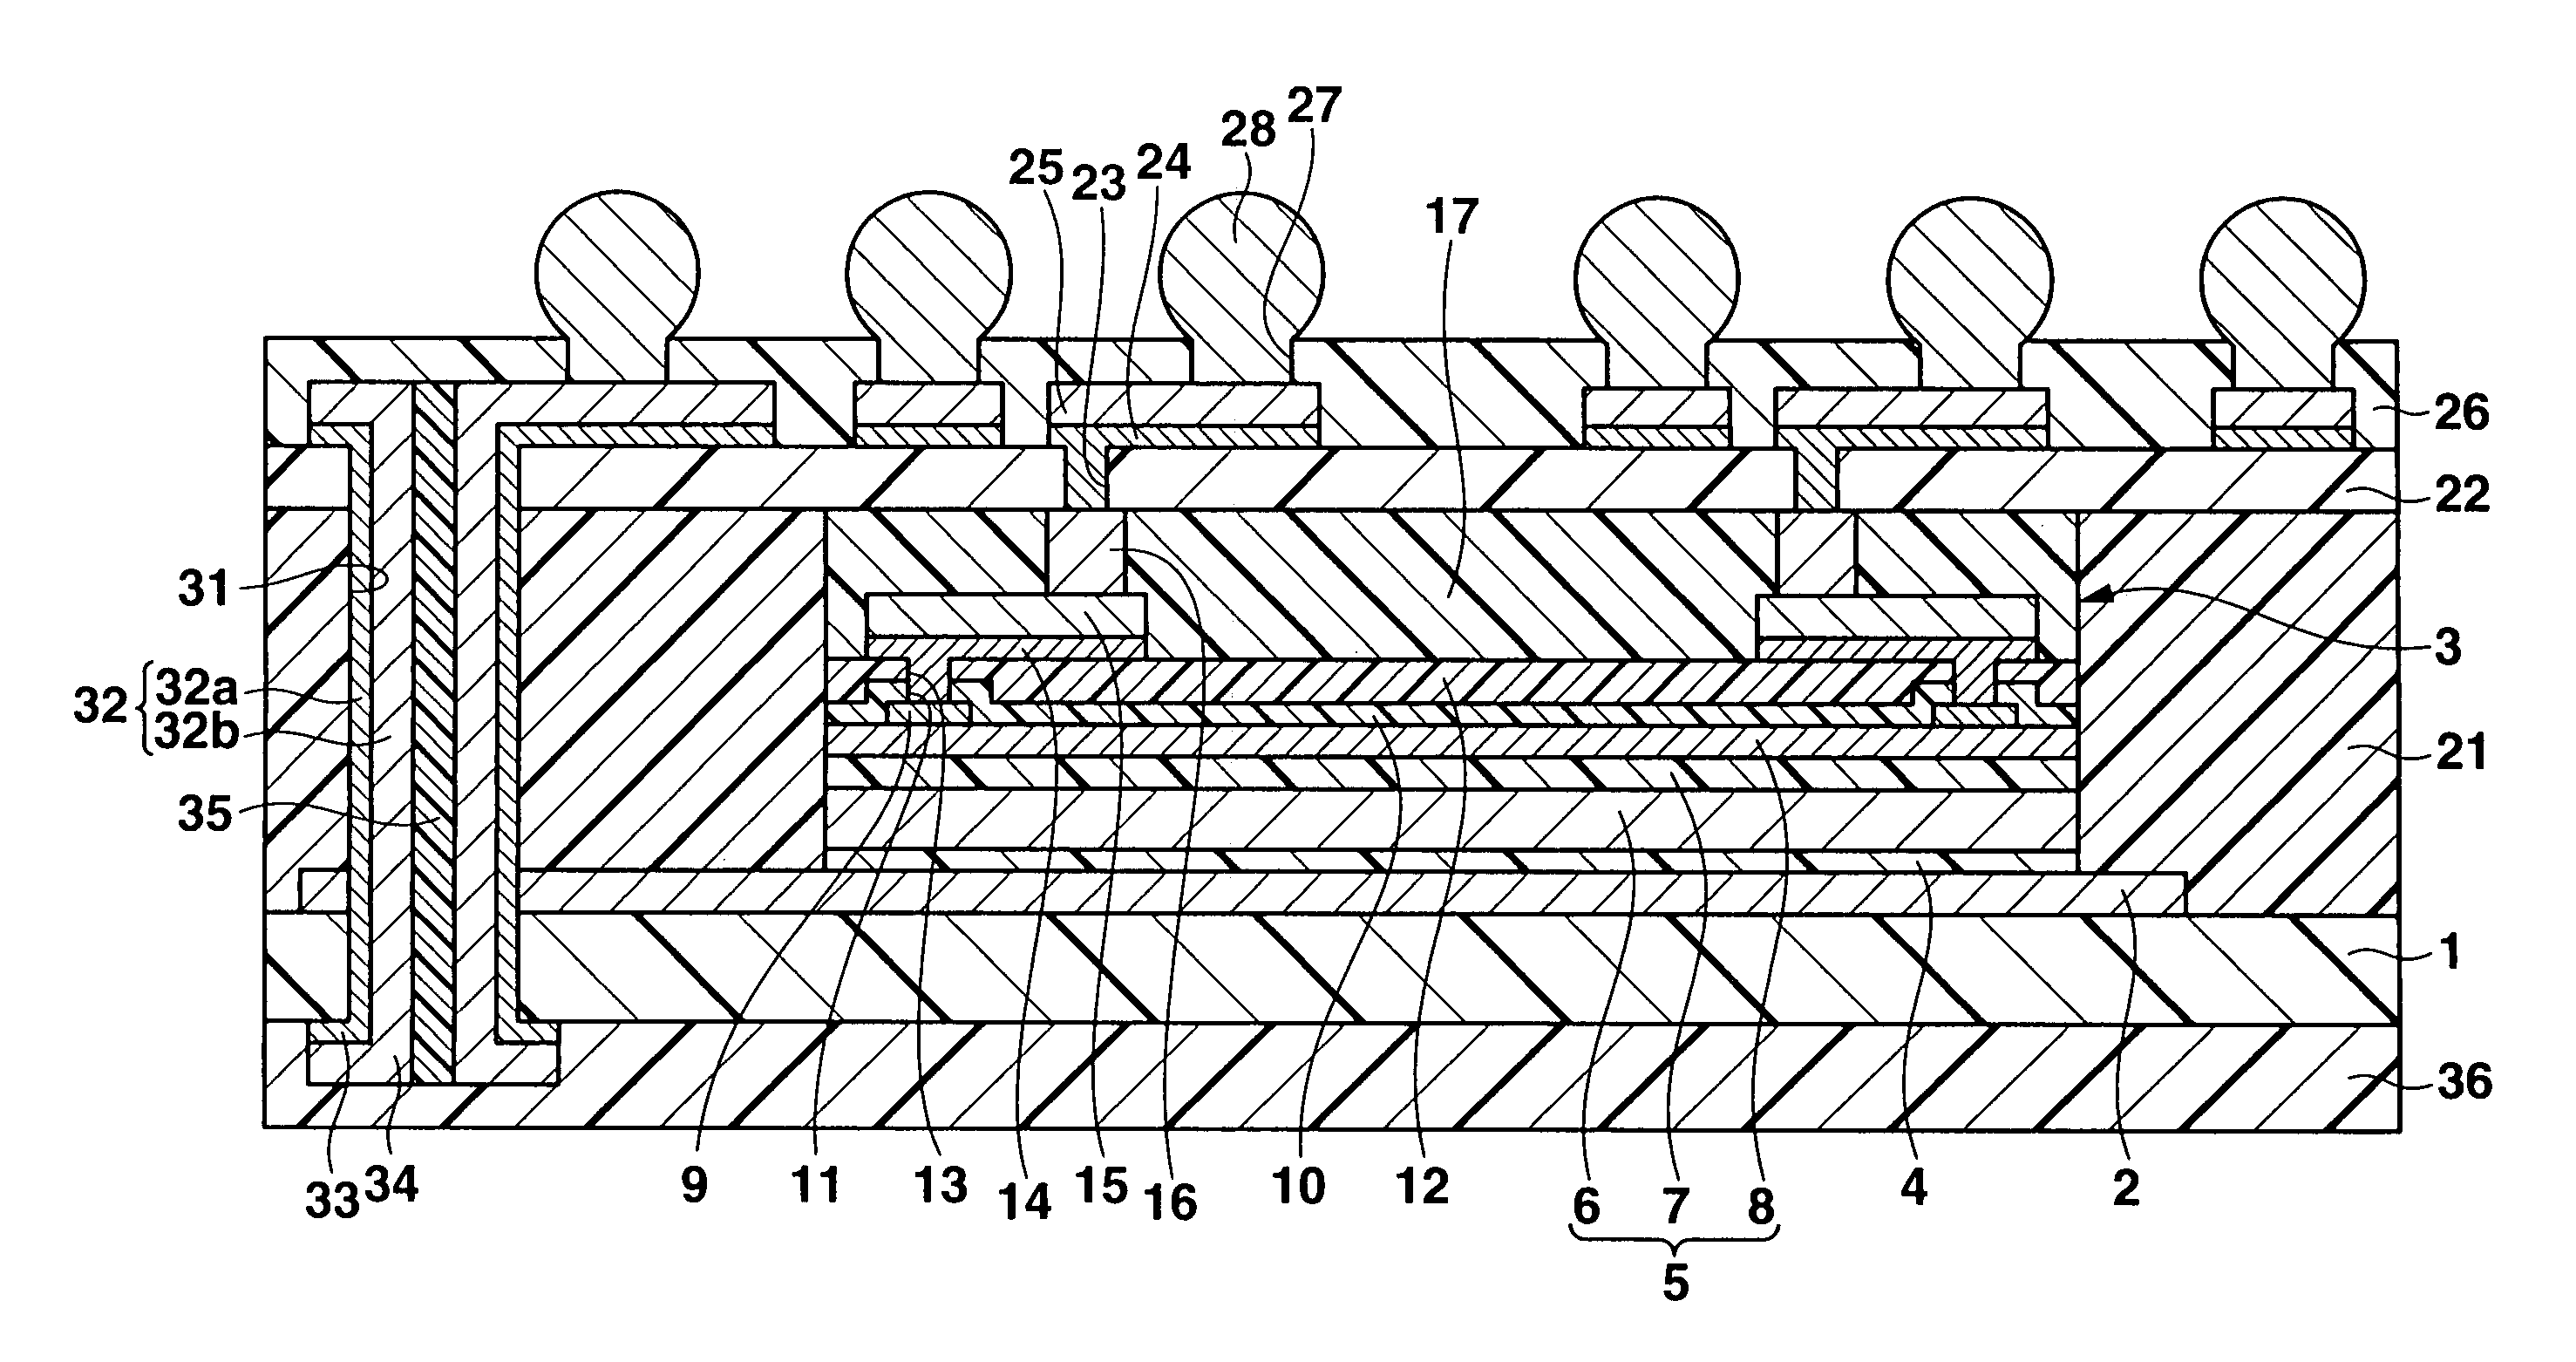 Semiconductor device incorporating a semiconductor constructing body and an interconnecting layer which is connected to a ground layer via a vertical conducting portion